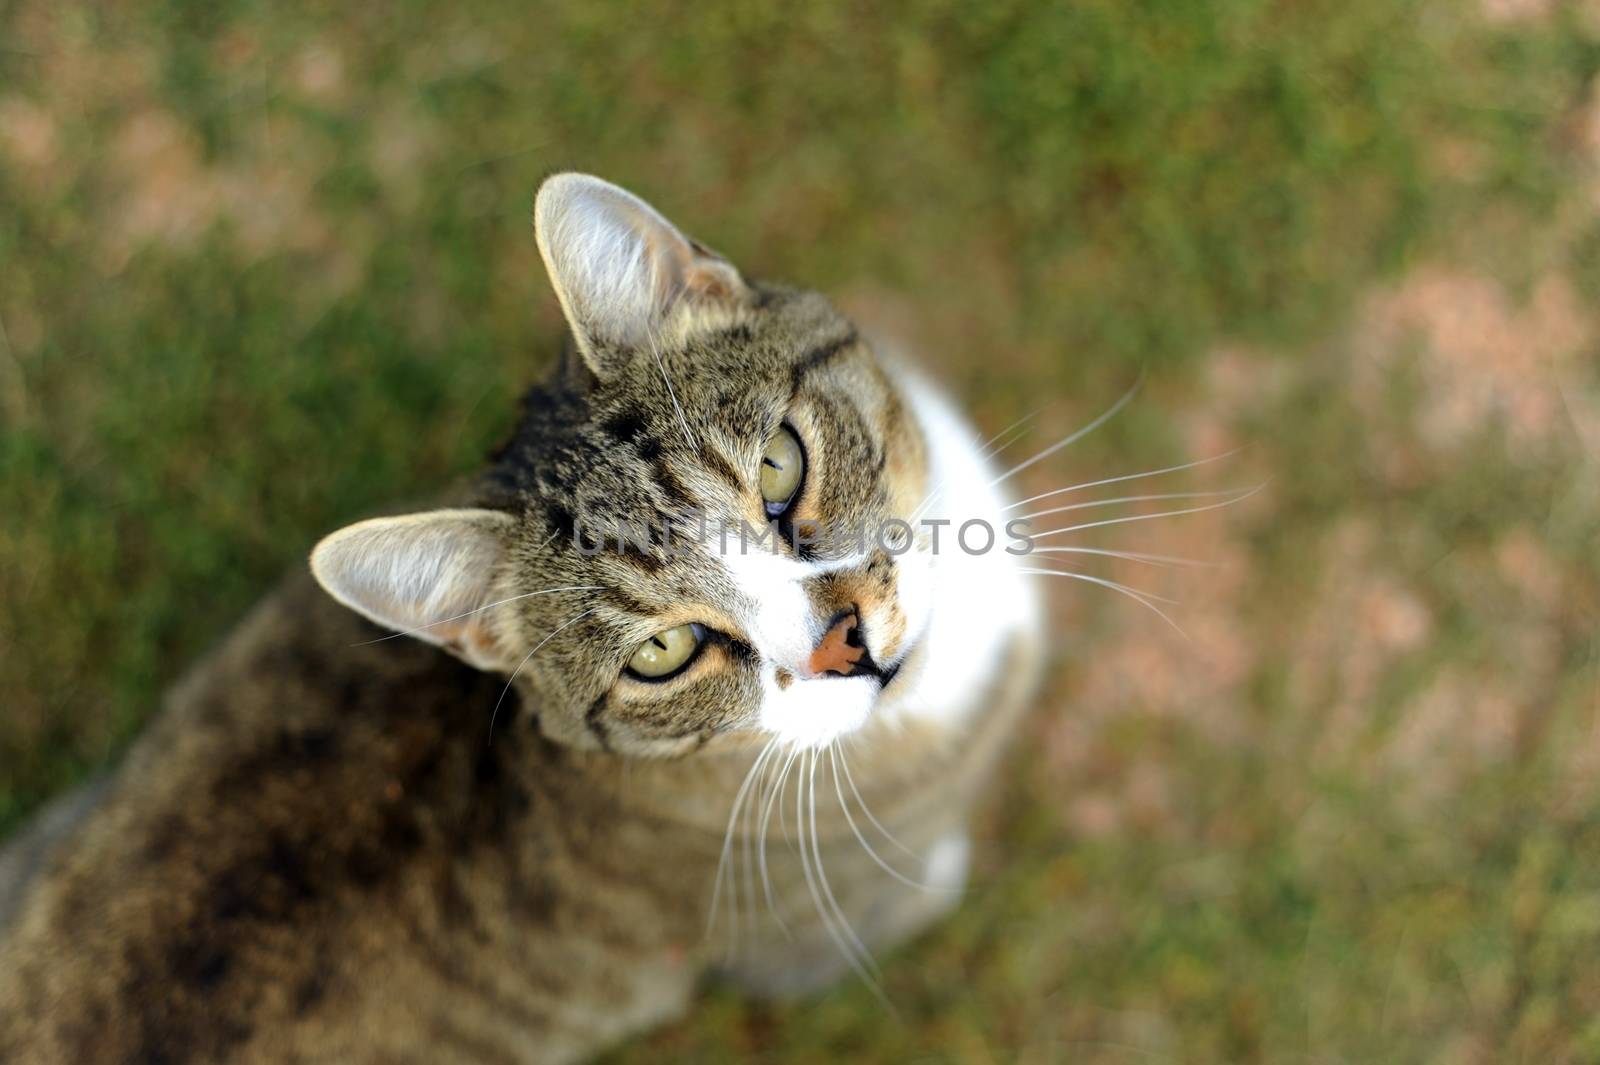 Nice Cat on Grass. Animals Photo Collection.